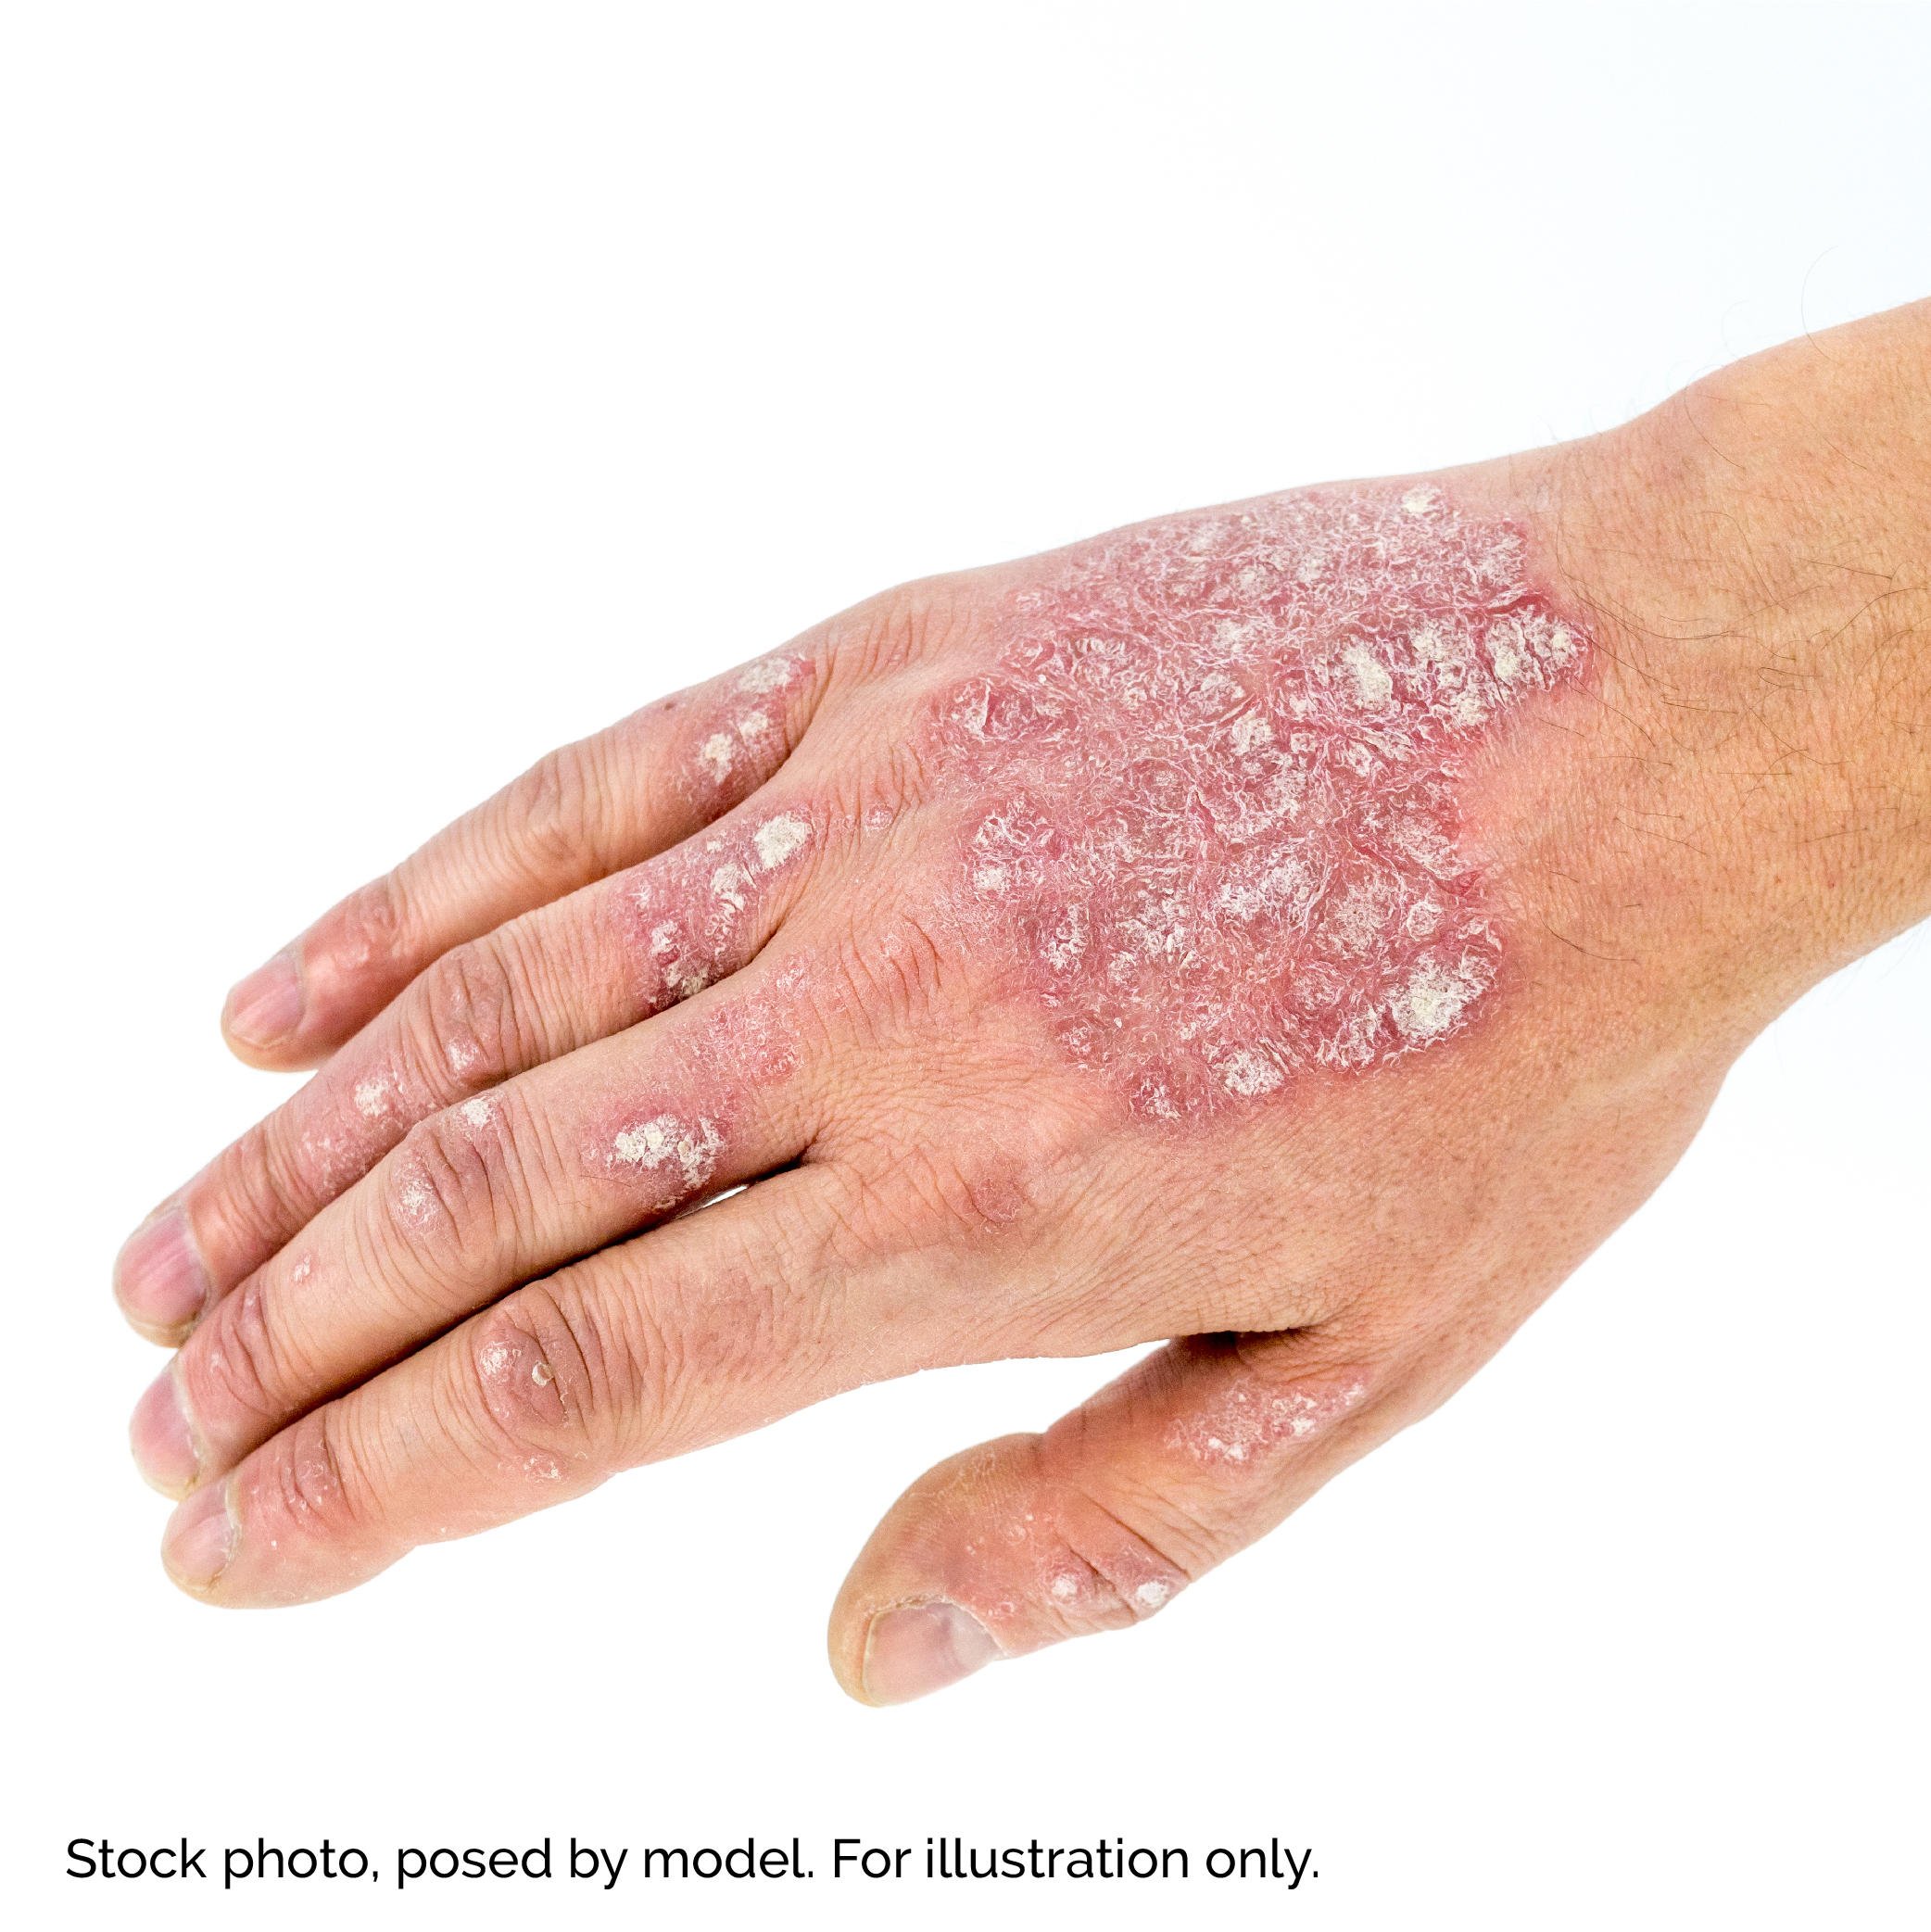 Diagnosed with Psoriasis